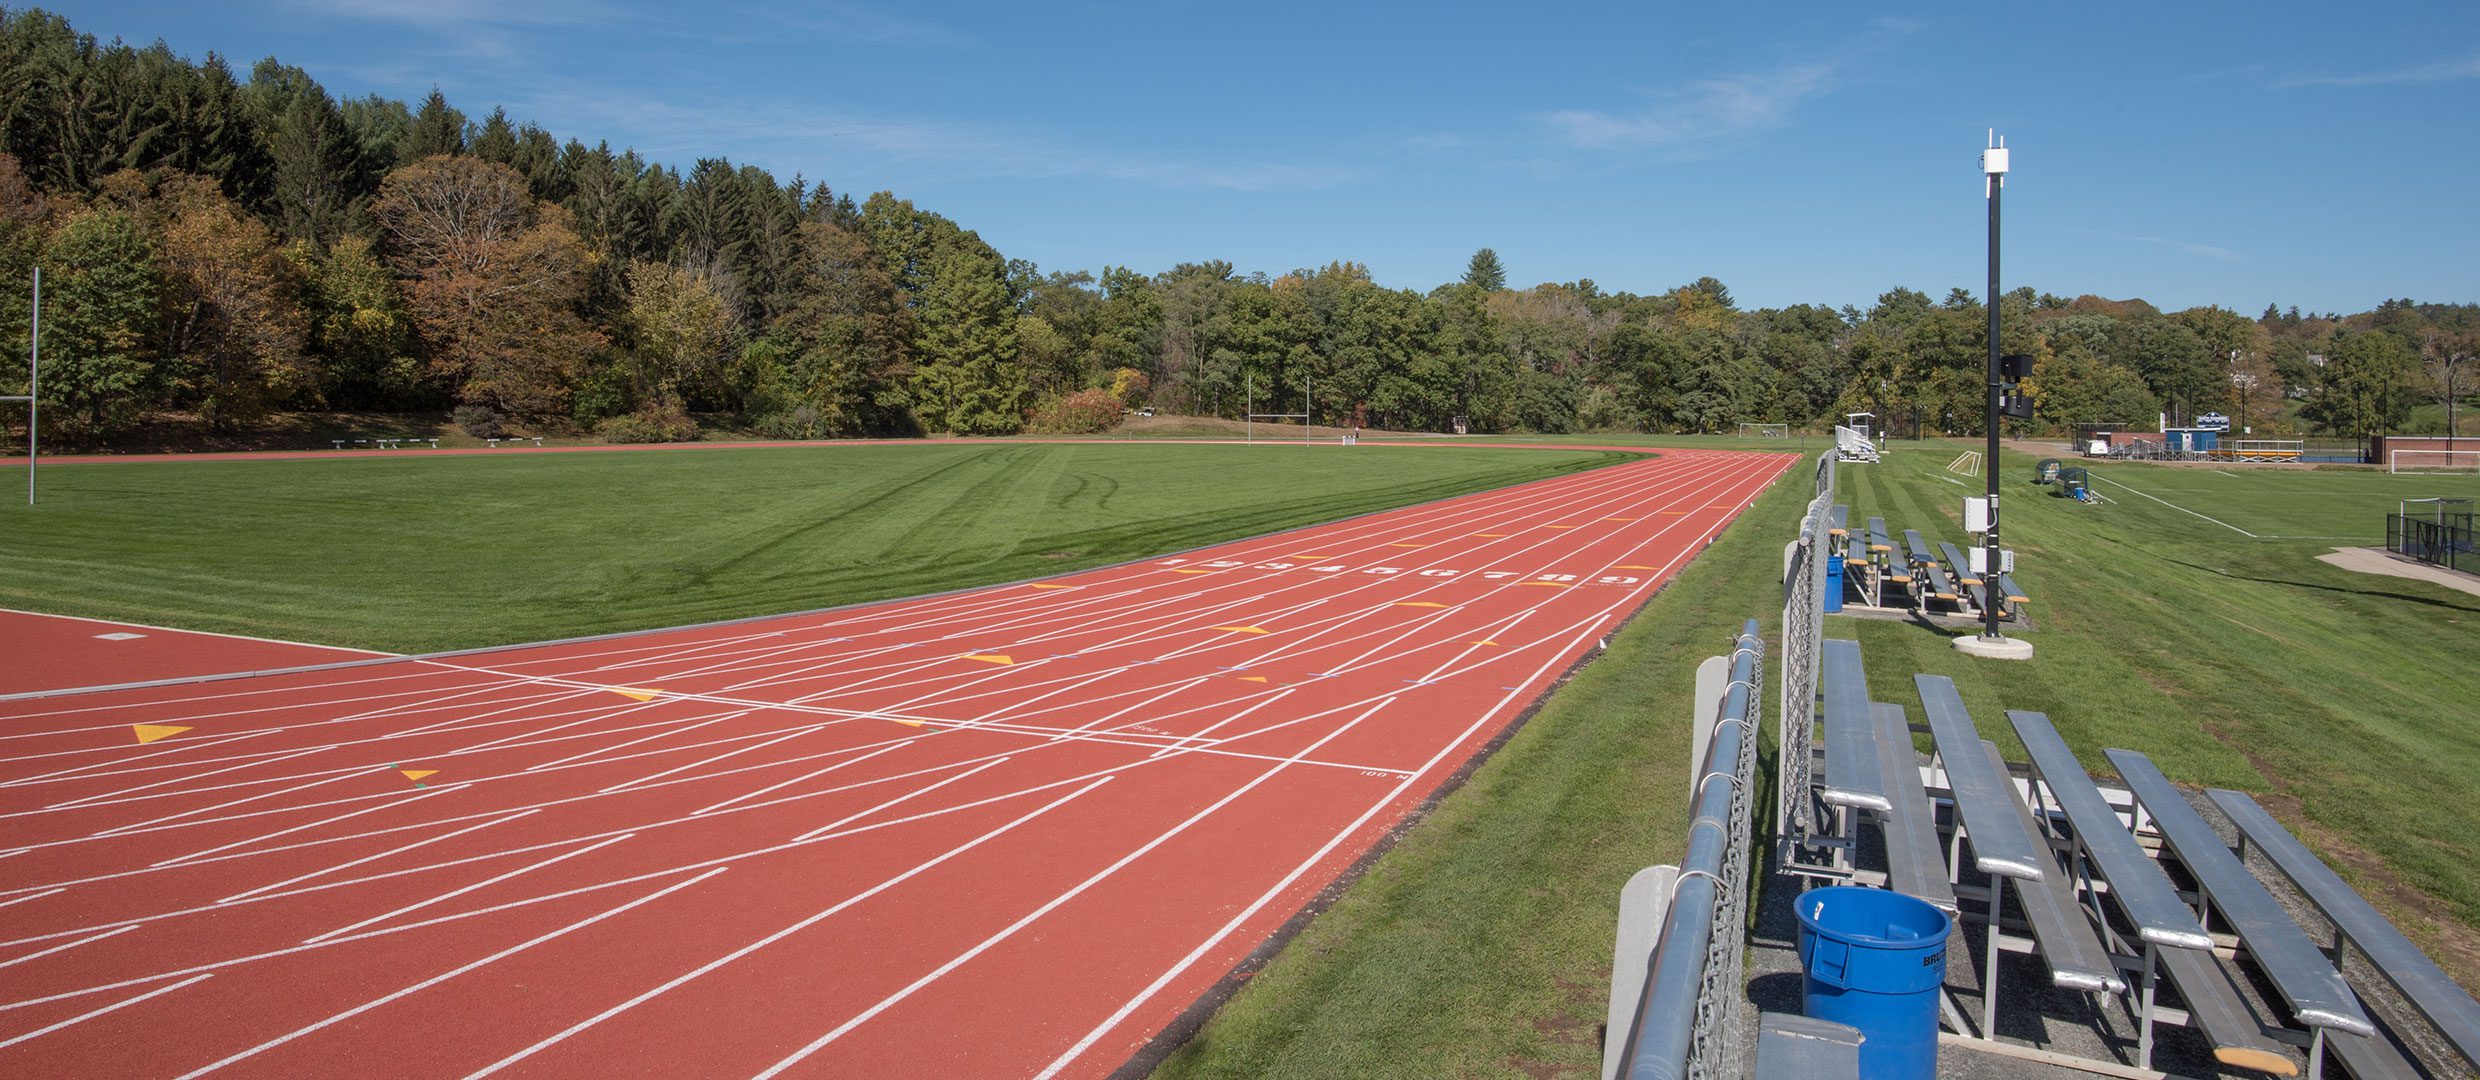 Track & Field at Smith College